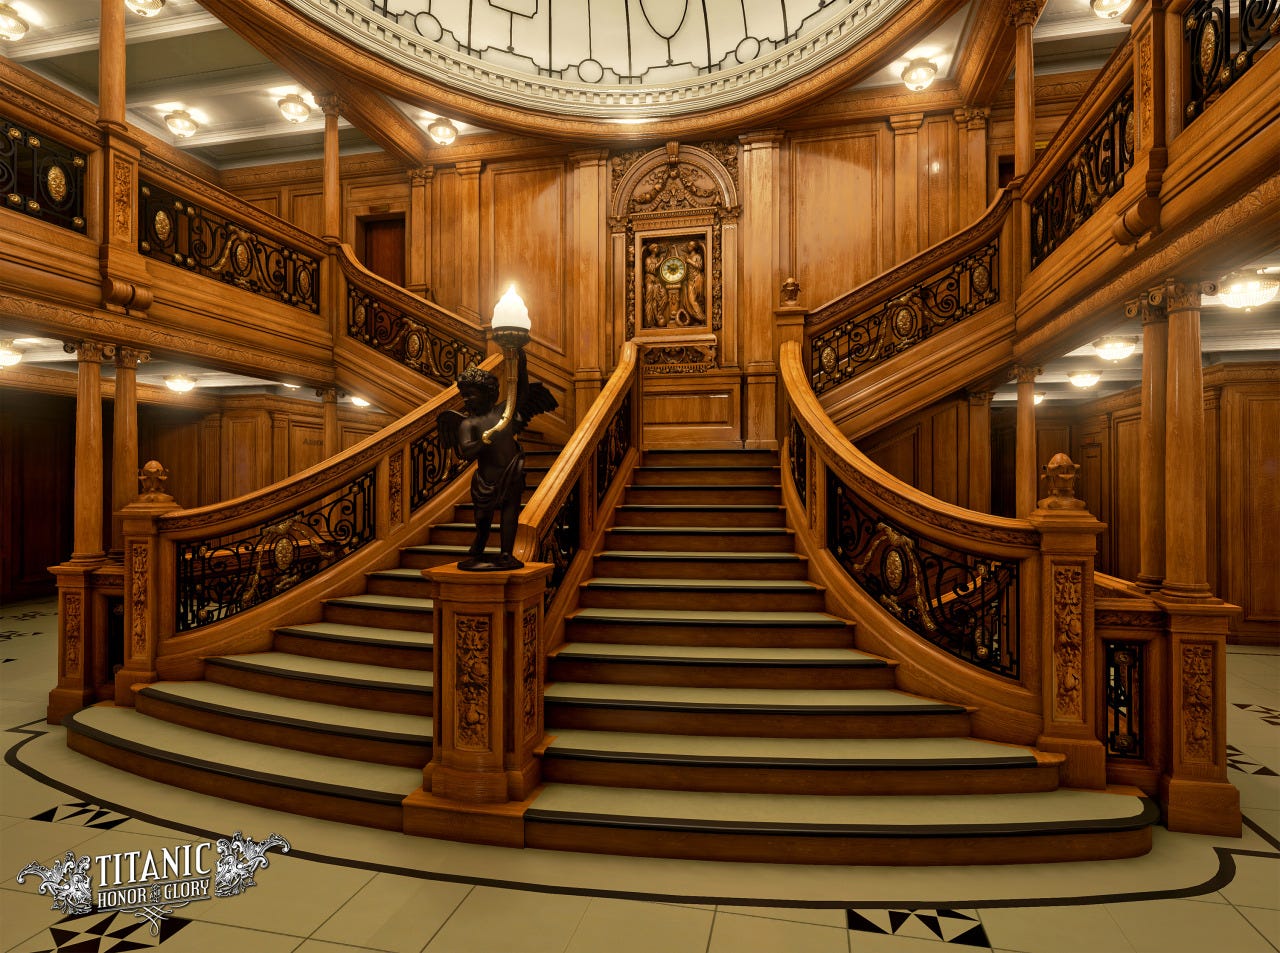 Digital recreation of Titanic grand staircase. built of solid irish oak, with each banister containing elaborate wrought iron grilles with ormolu swags in the Louis XIV style. The staircases were 20 ft. wide and projected 17 ft. from the bulkhead.